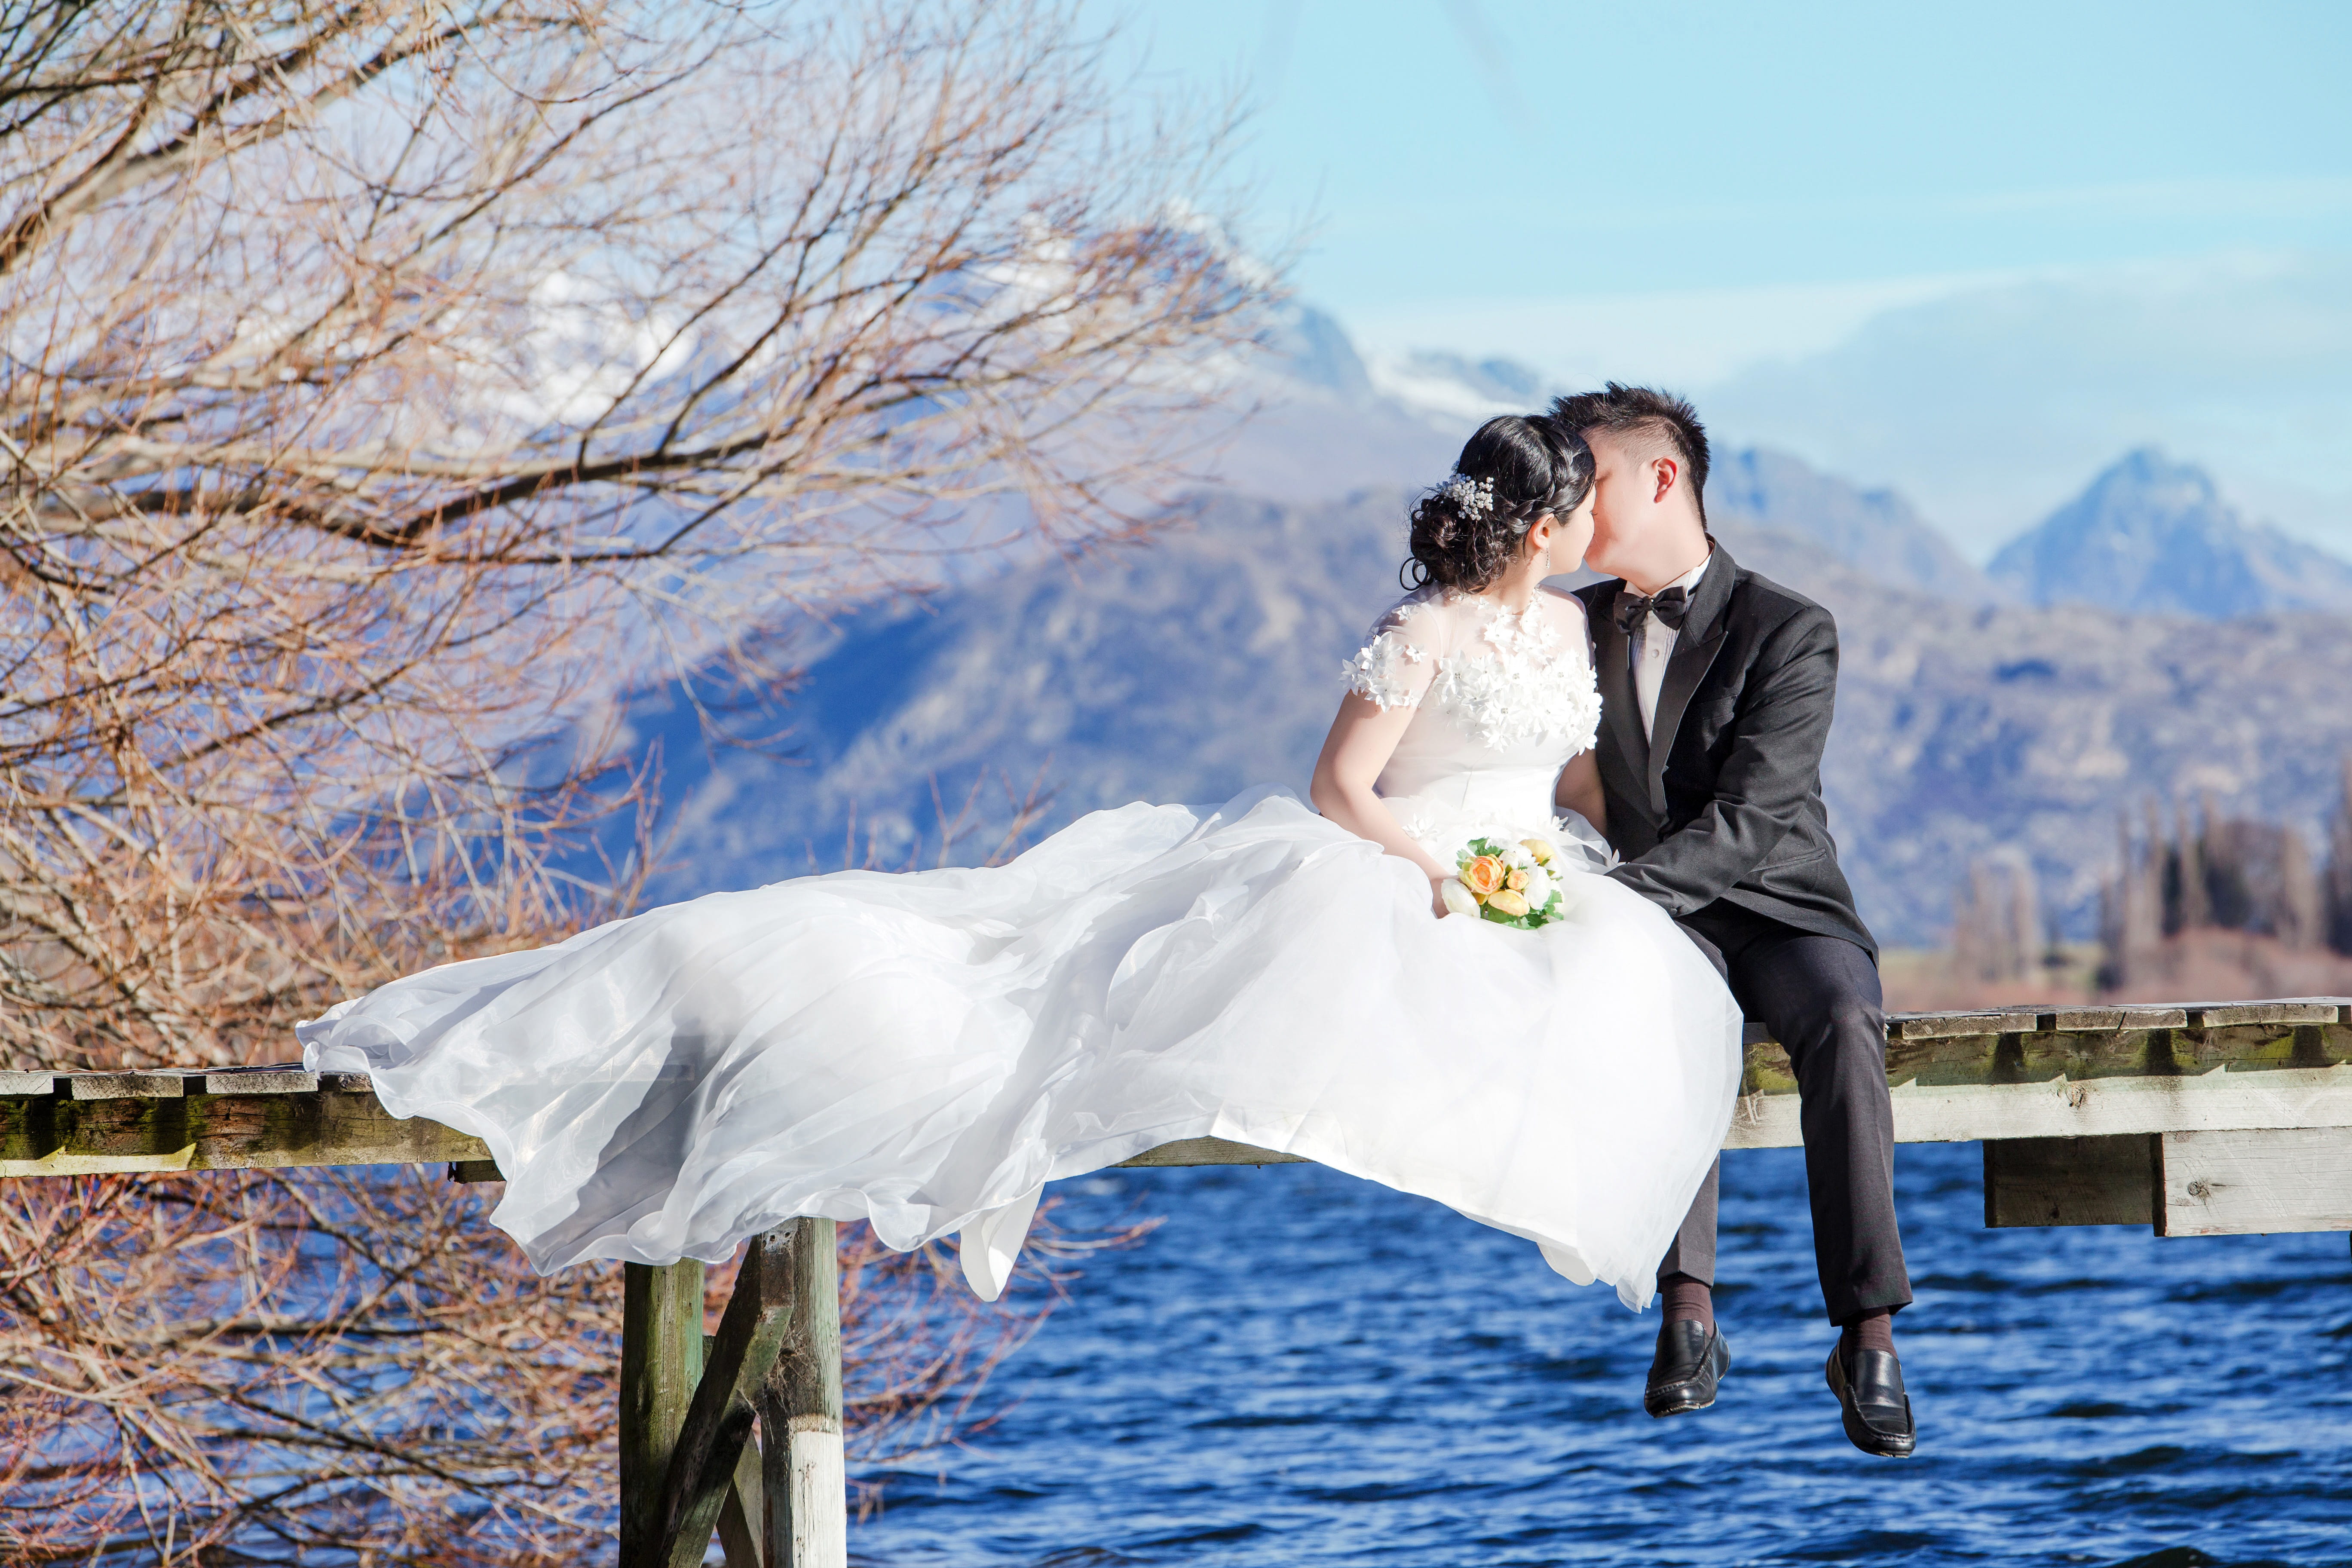 Bride and Groom Kissing by the Lake, dress, love, public domain